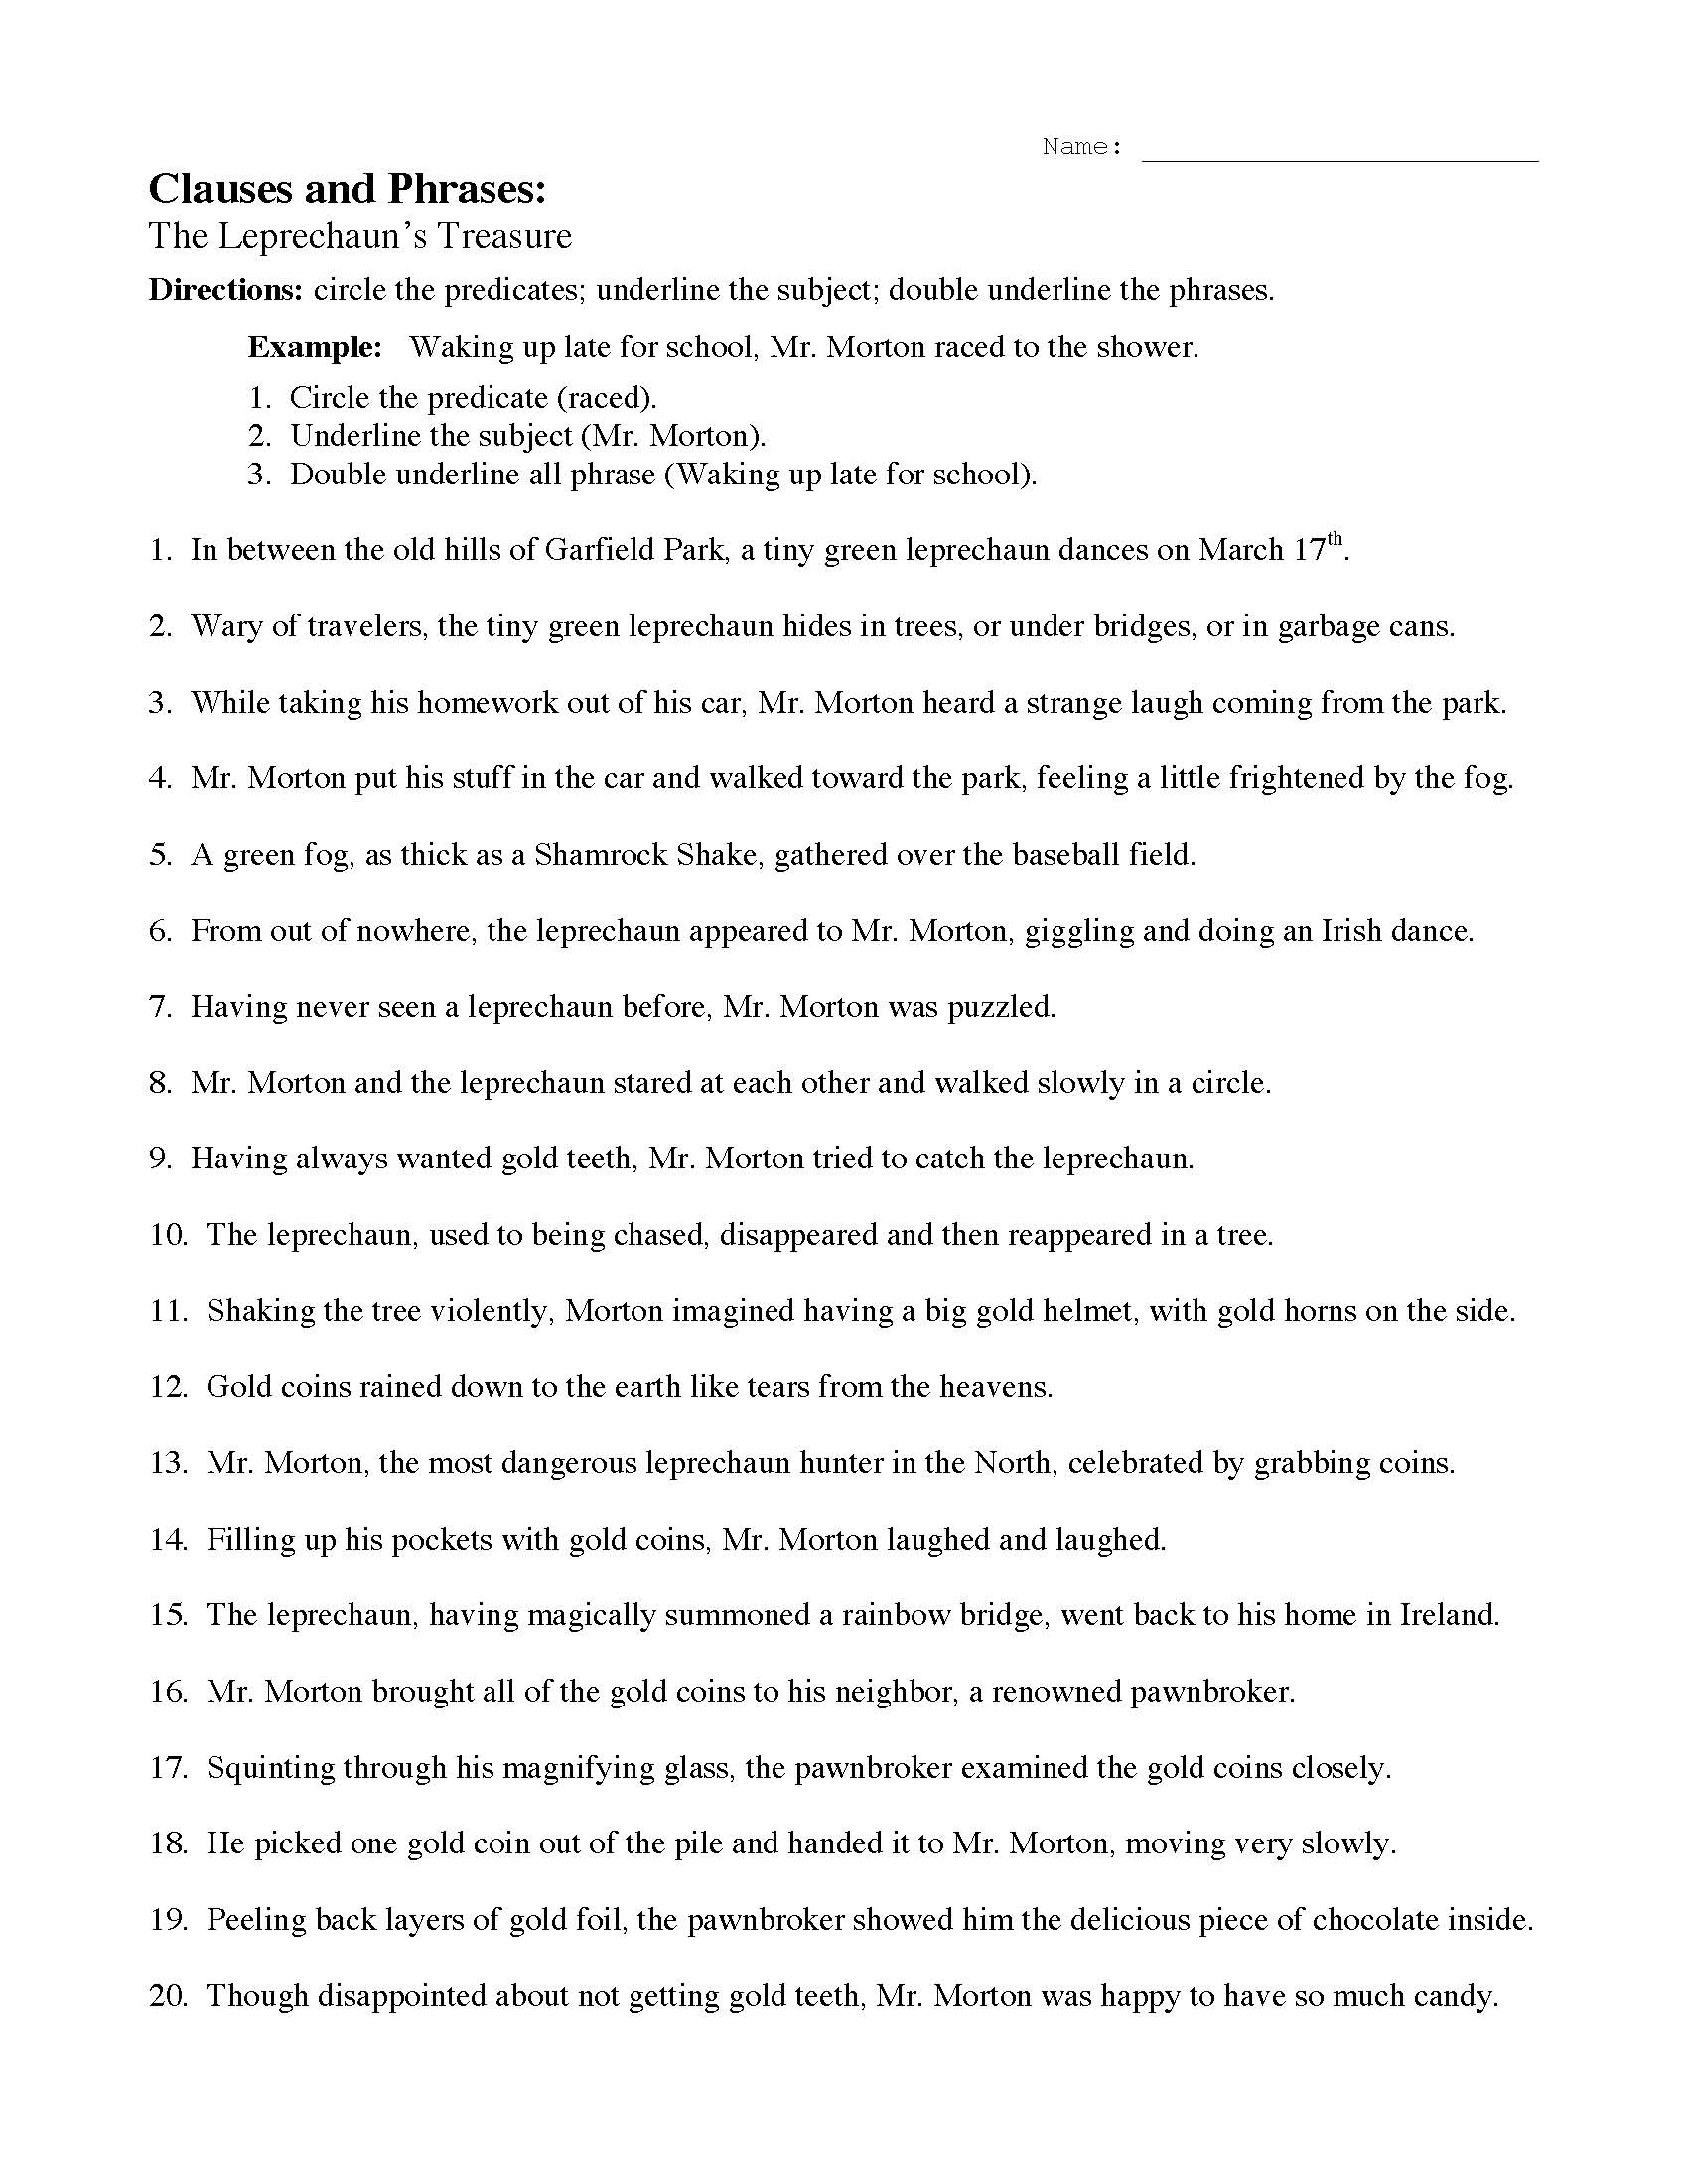 worksheet-of-phrases-and-clauses-for-class-7